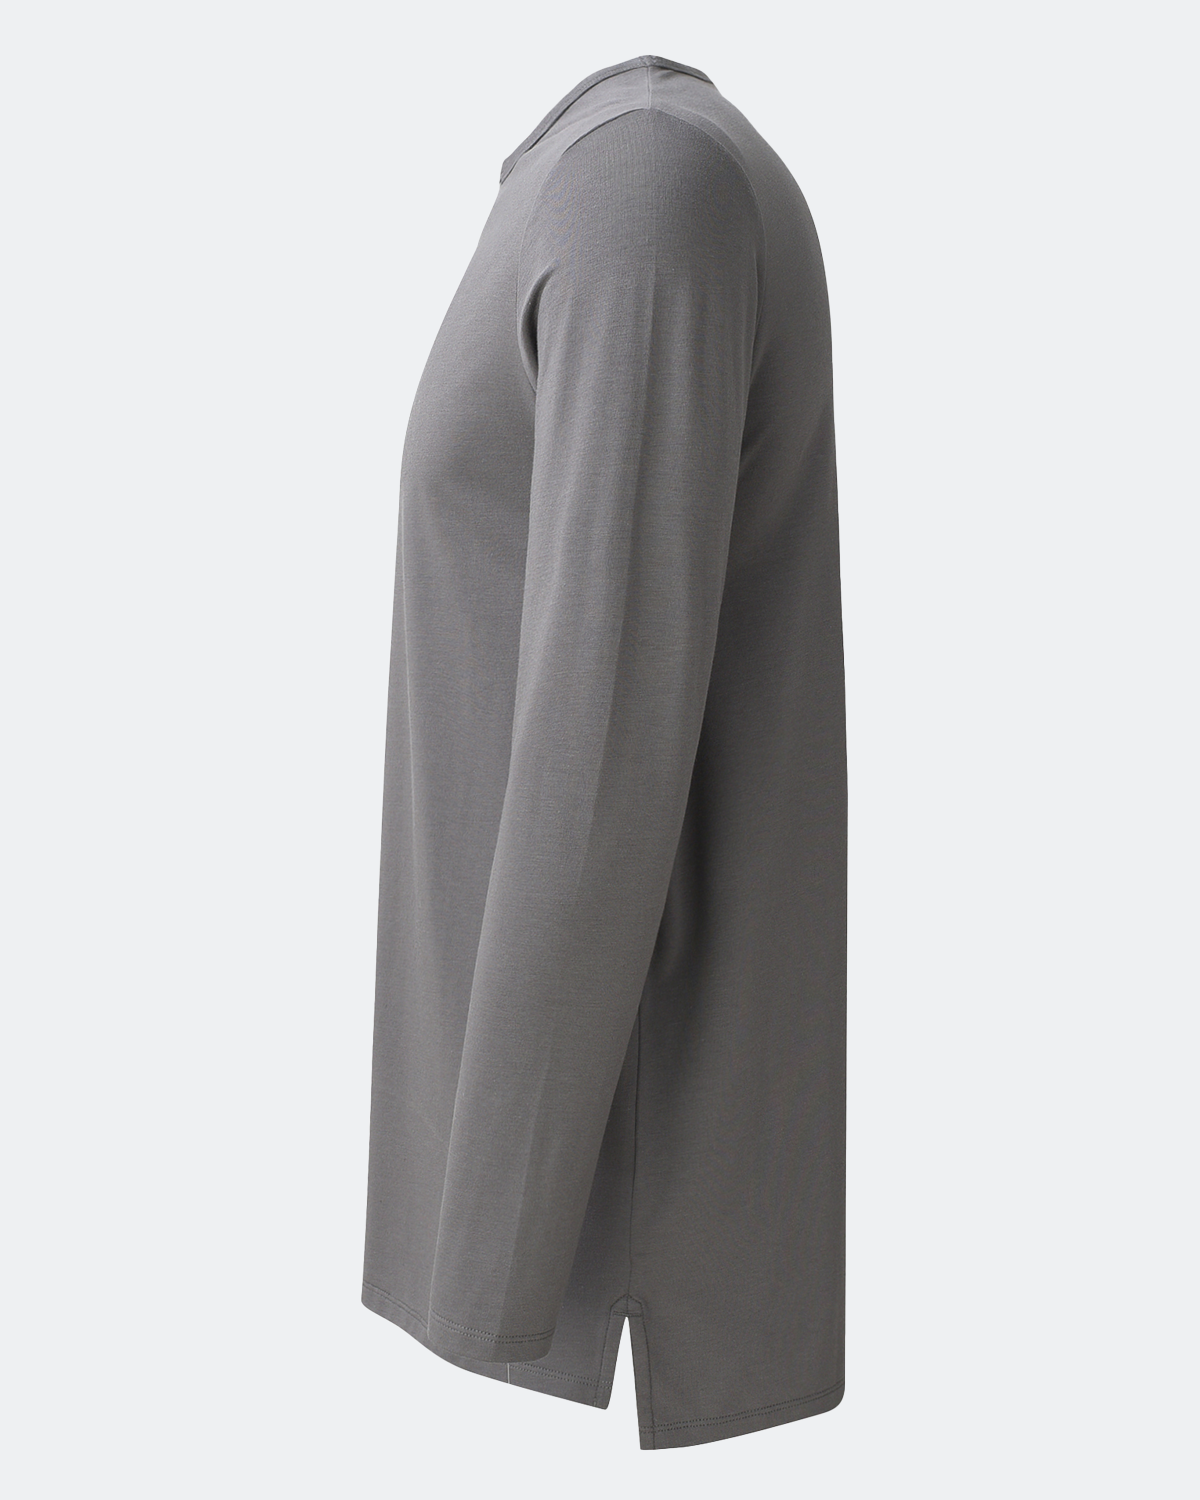 Spectacle 2.0 Charcoal Long Sleeve